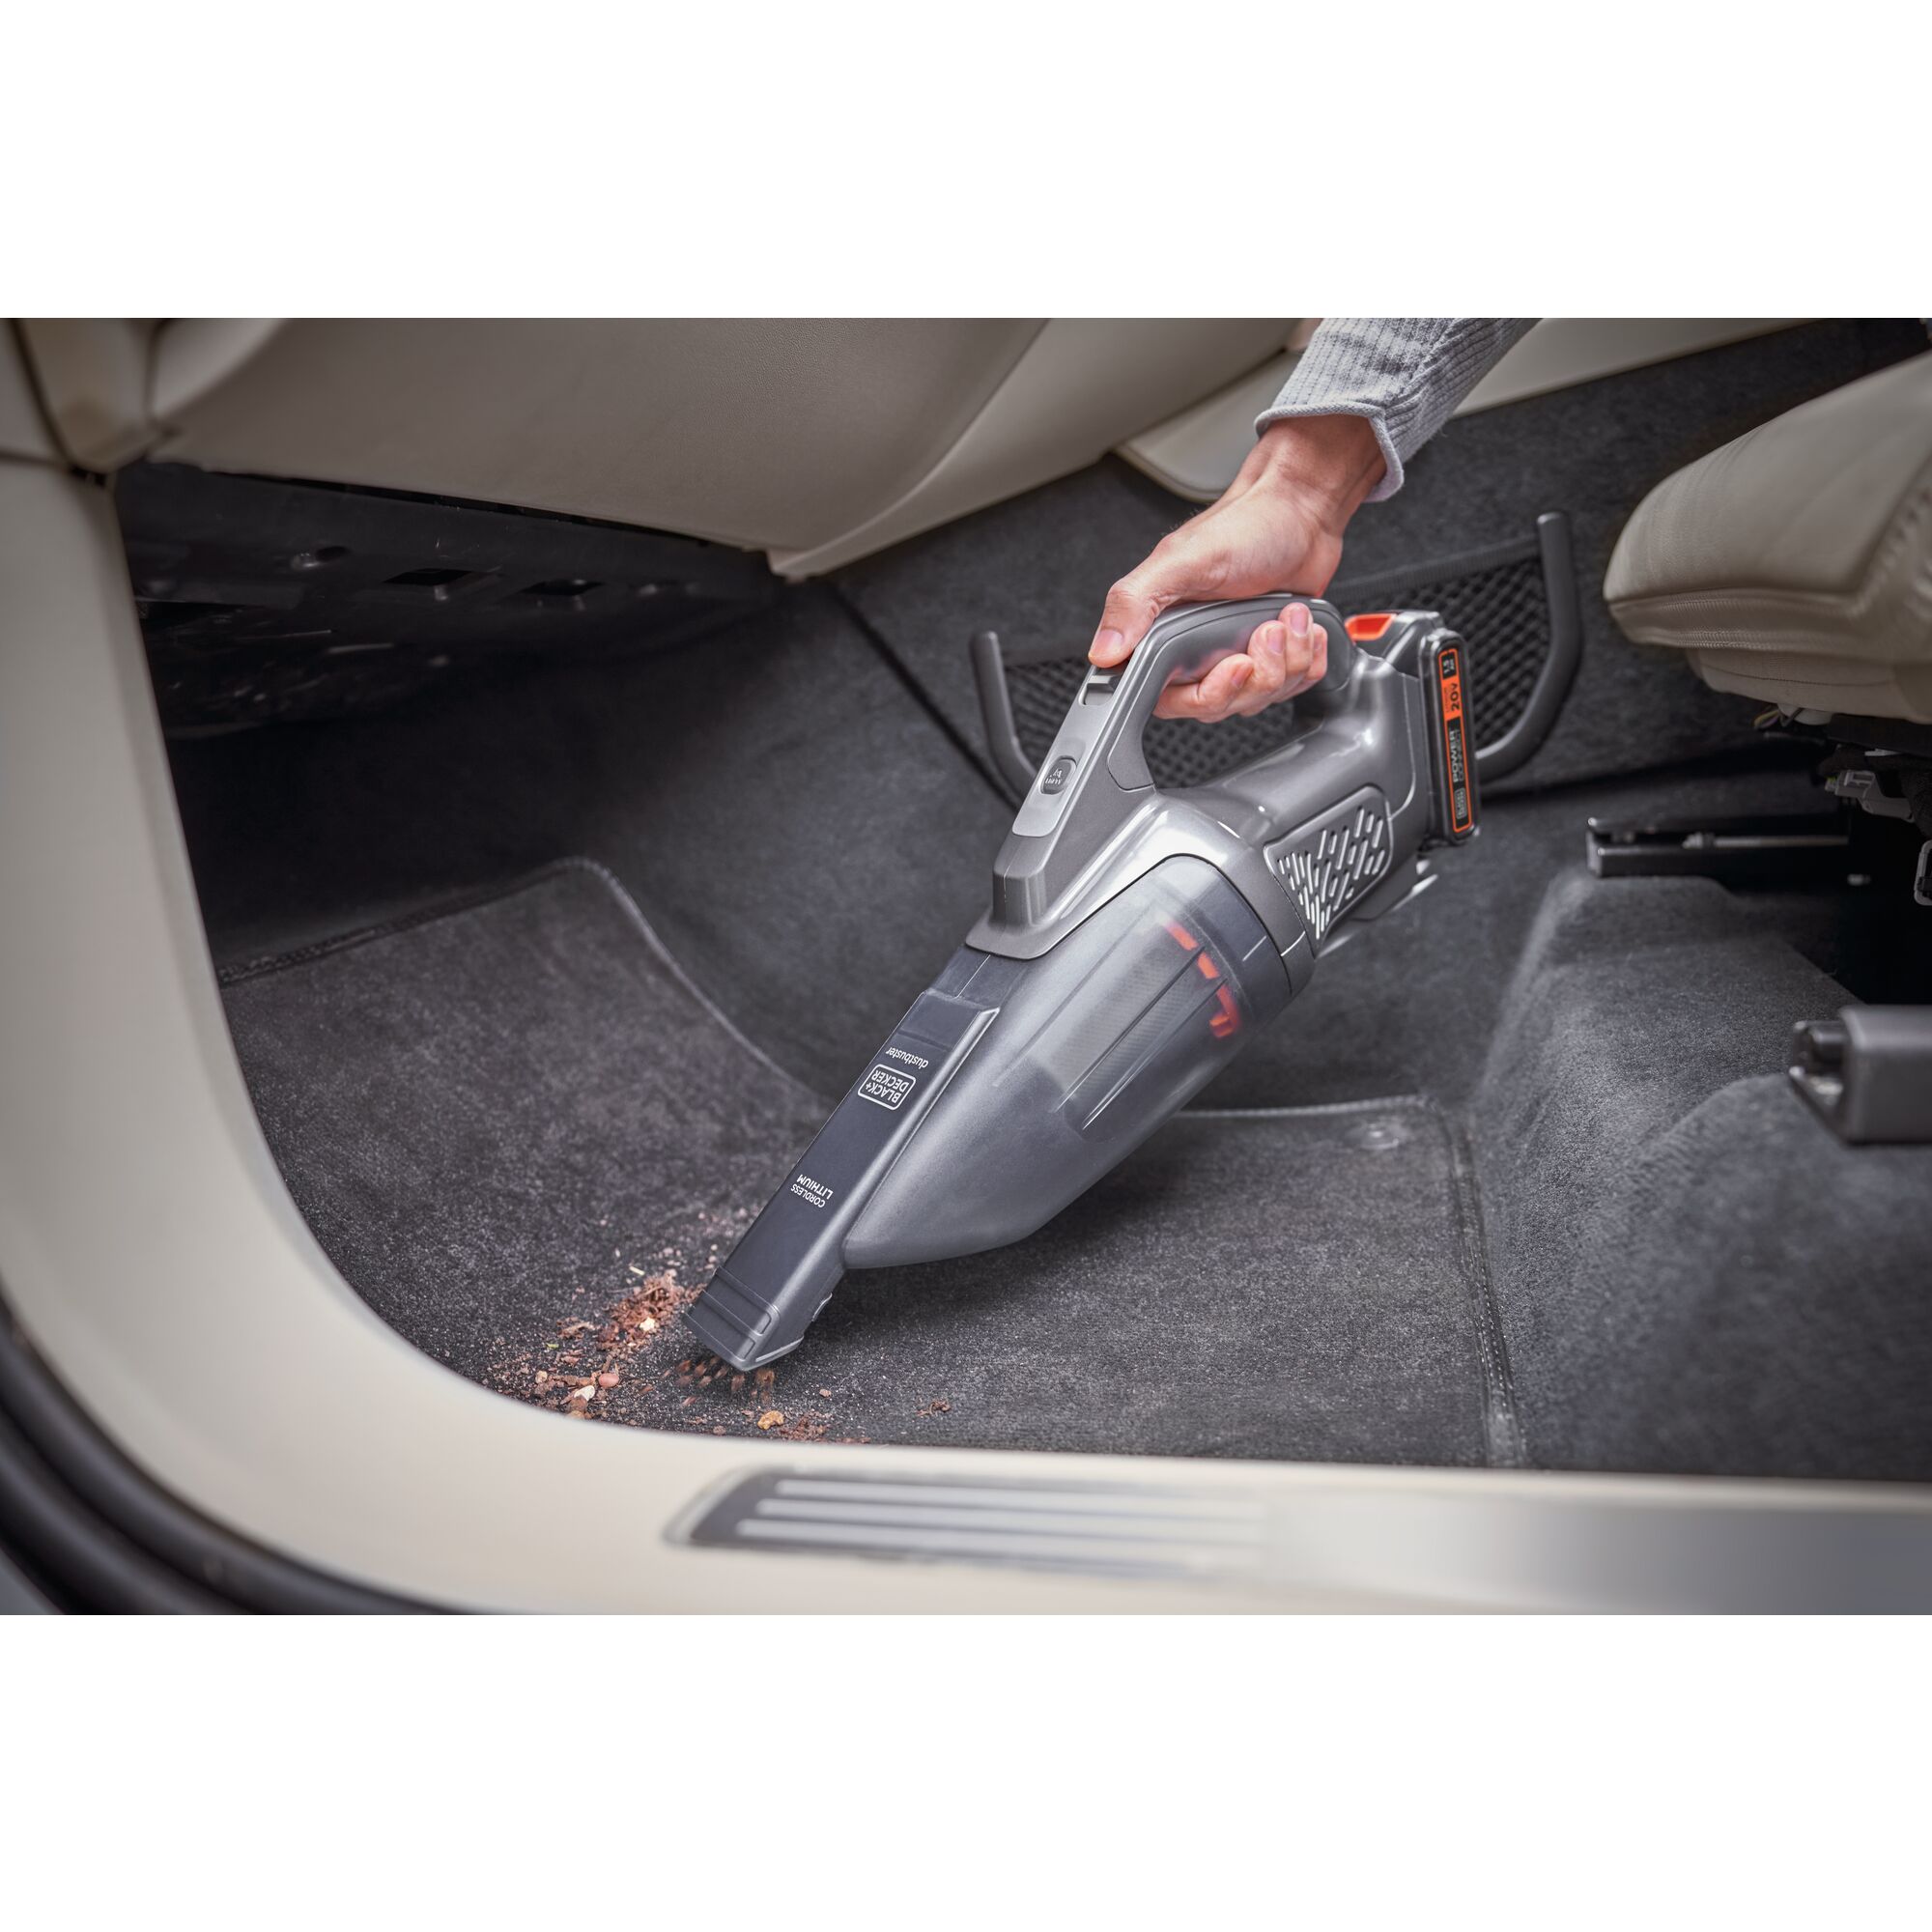 20 volt Powerconnect hand vacuum being used to clean the carpet floor in a car